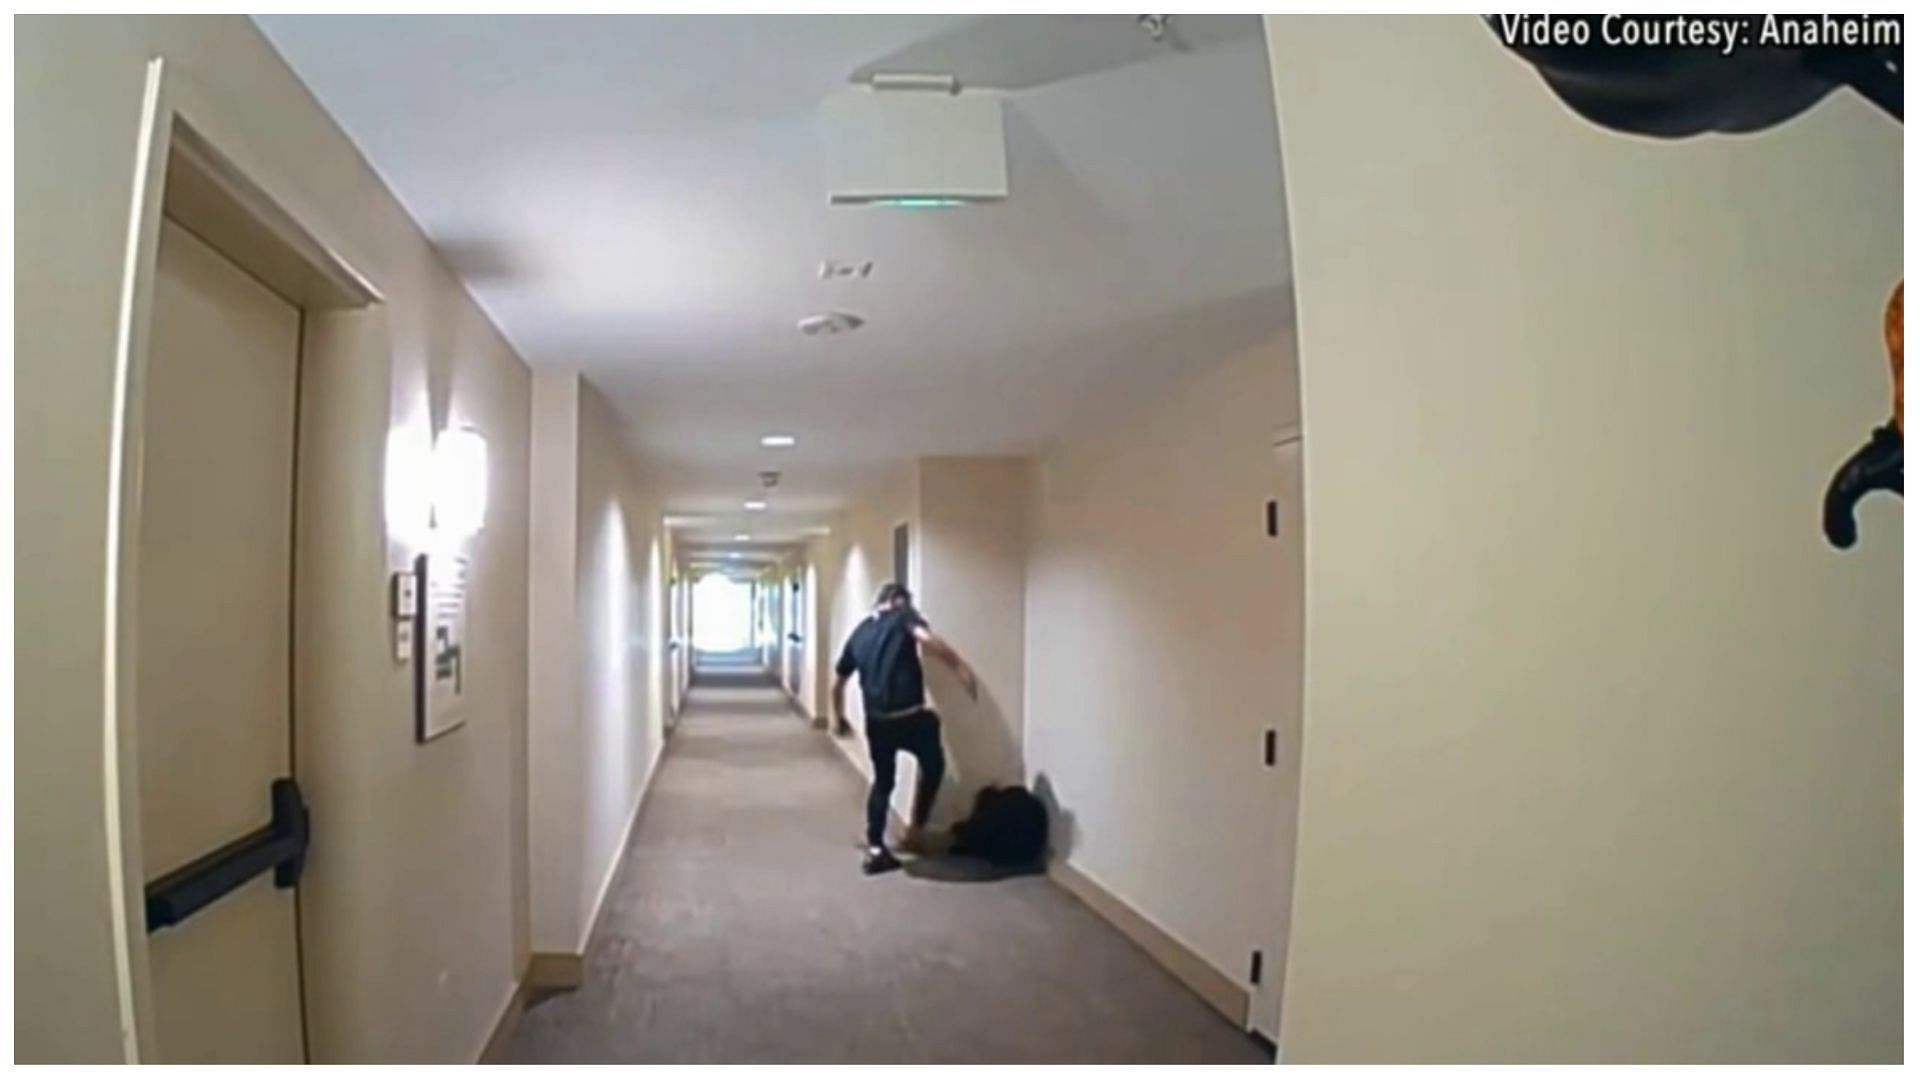 The incident provoked outrage among the building residents (image via Anaheim Police Department)